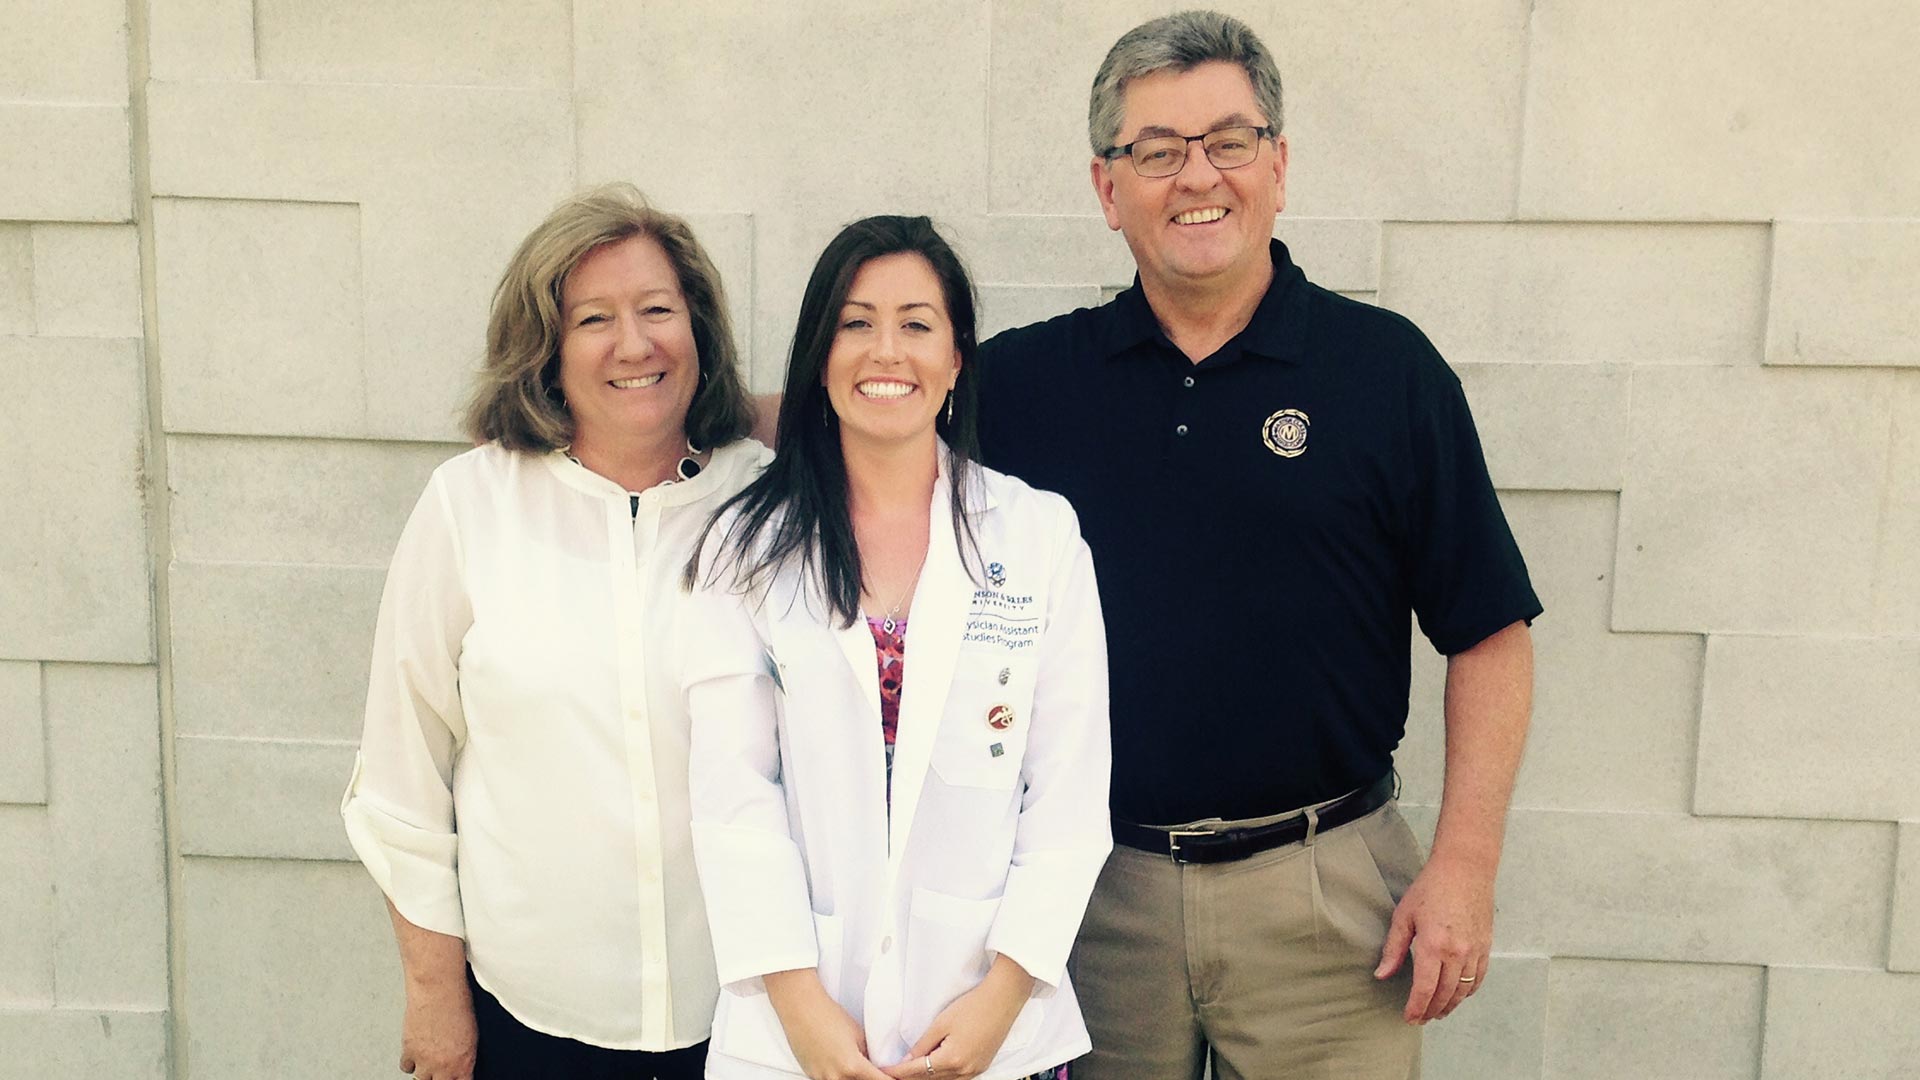 Heisler with parents at the White Coat ceremony.